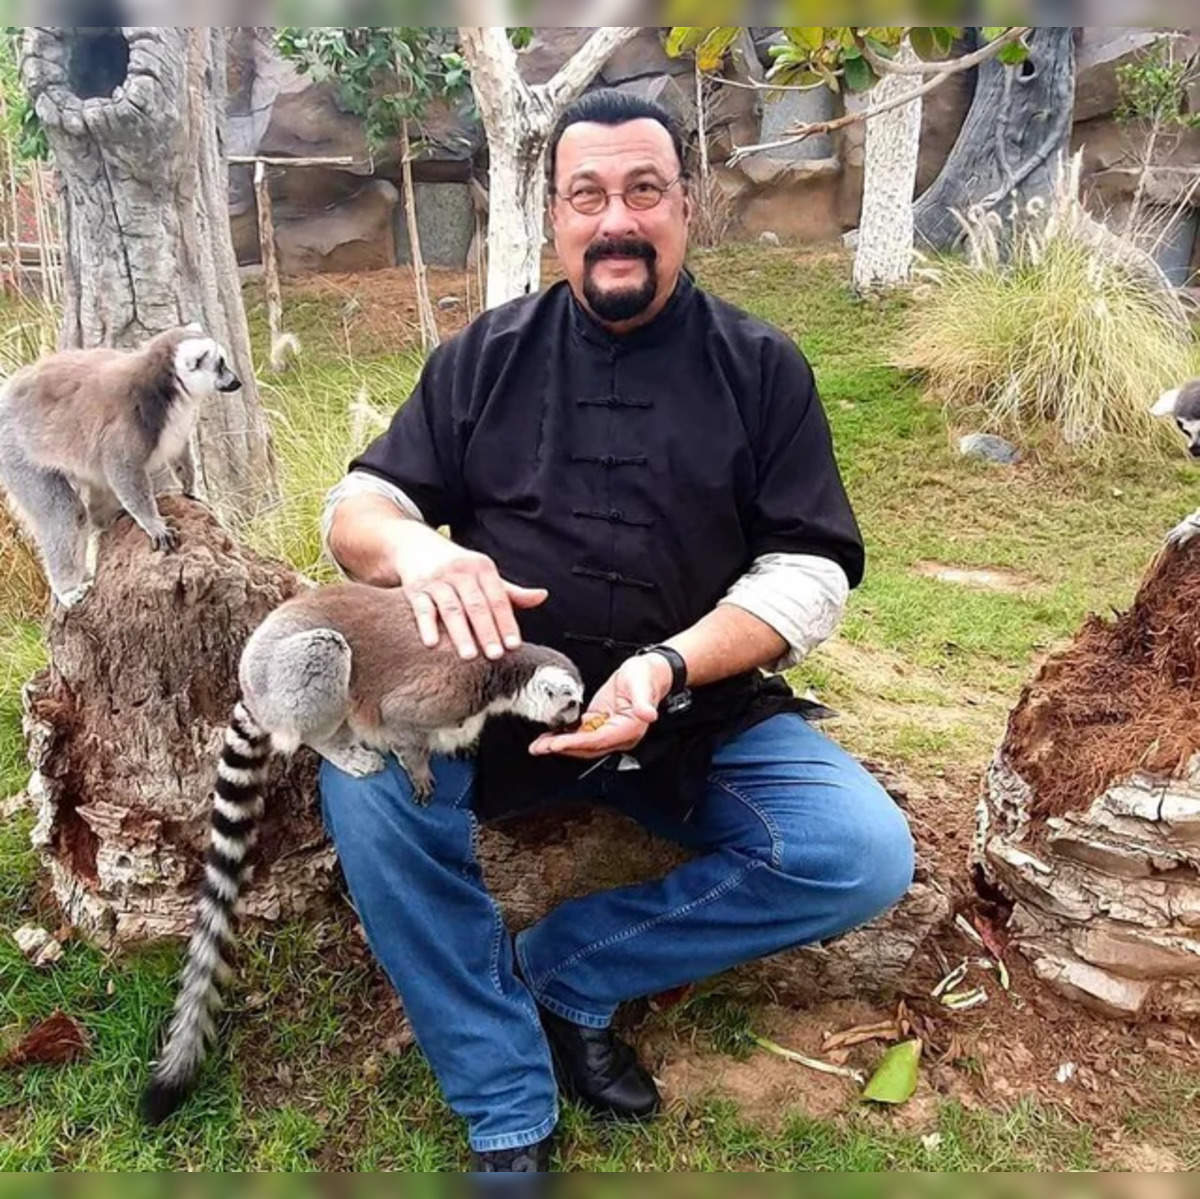 hard to kill steven seagal: 'Hard To Kill' actor Steven Seagal enjoys  zoo-day with ligar, wildlife - The Economic Times